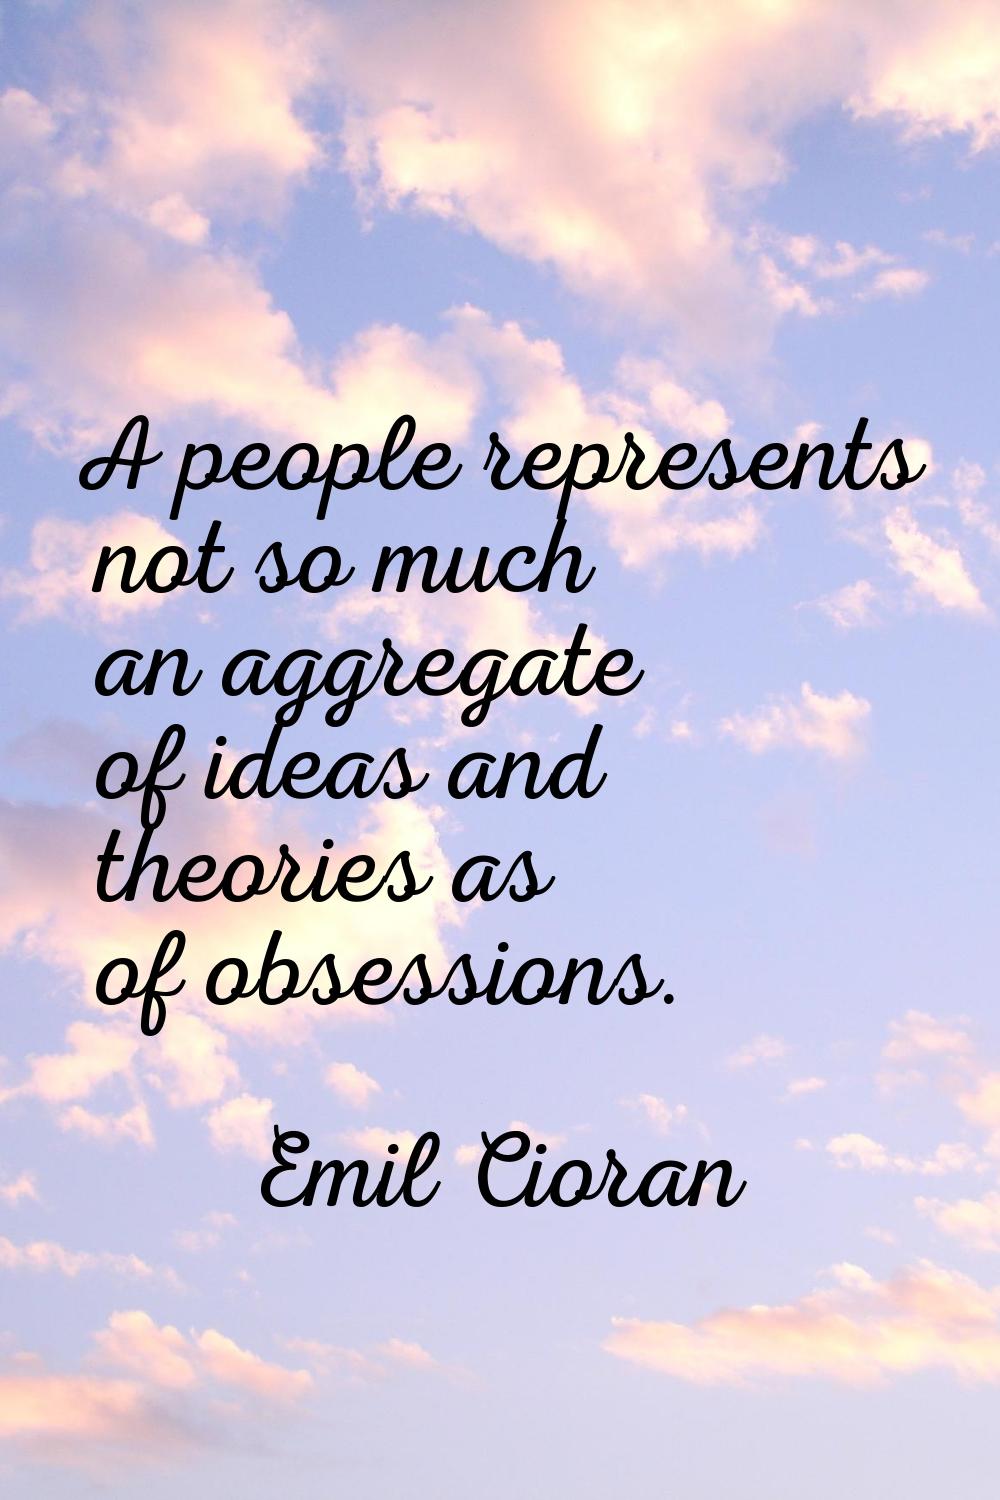 A people represents not so much an aggregate of ideas and theories as of obsessions.